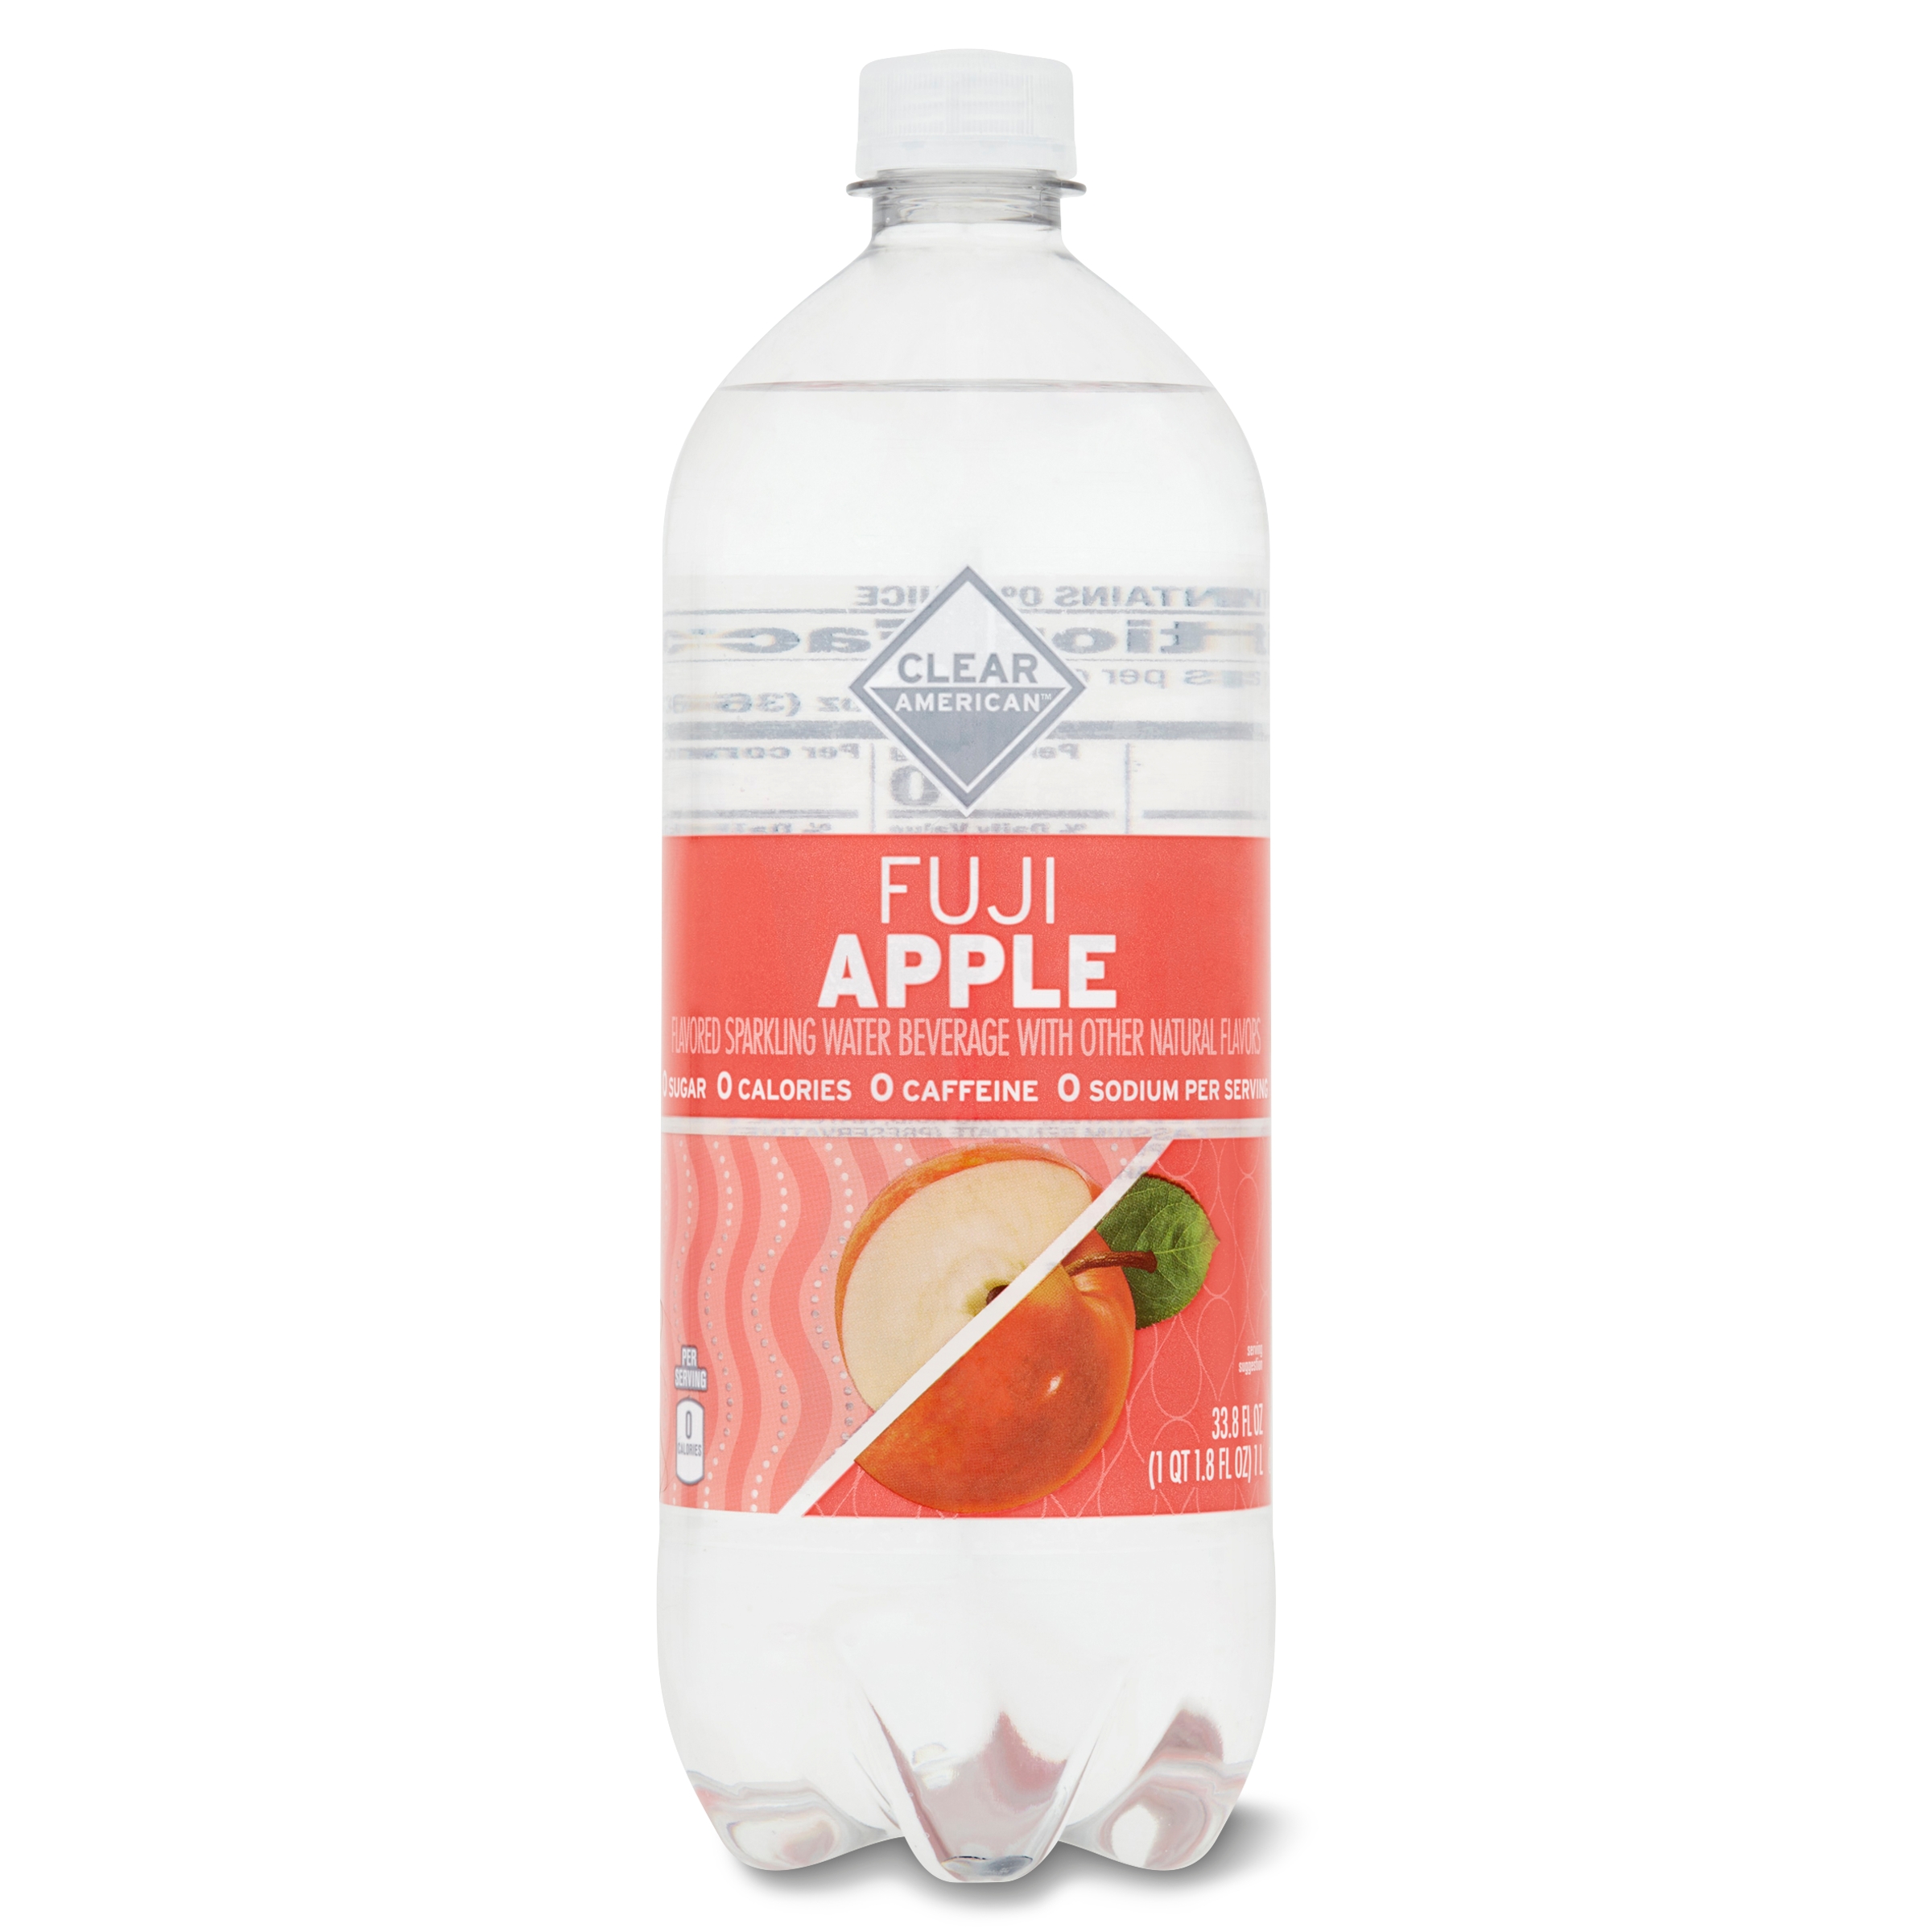 Clear American Fuji Apple Sparkling Water, 33.8 fl oz - image 1 of 7